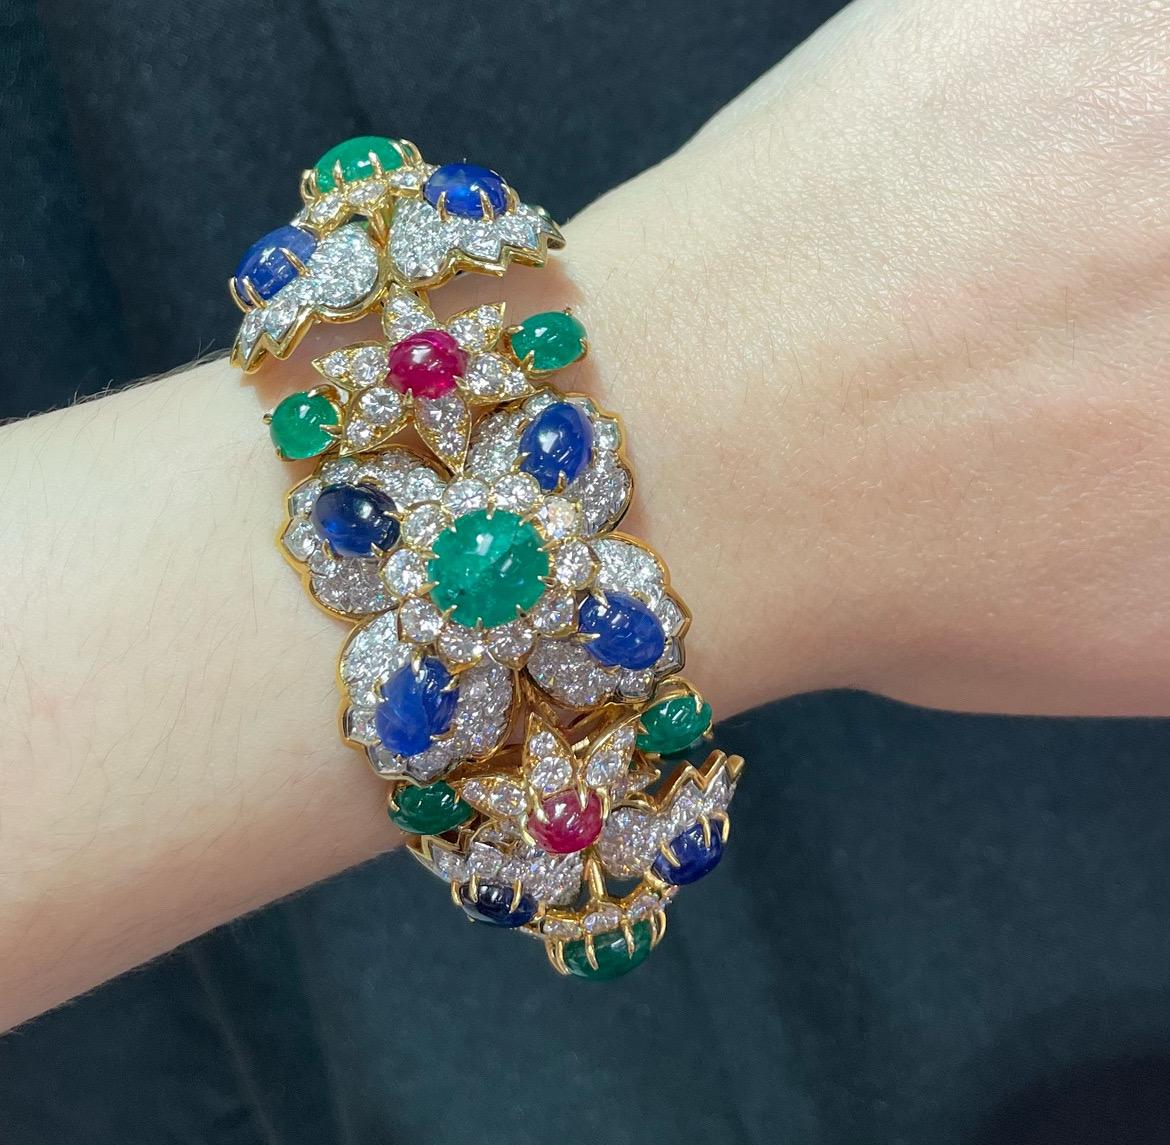 Van Cleef & Arpels Multi Gem Bracelet 

A beautiful multi-gem bracelet featuring a floral motif adorned with round and oval-shaped cabochon sapphires, emeralds and rubies, and round-cut diamonds.
The center of the bracelet converts into a